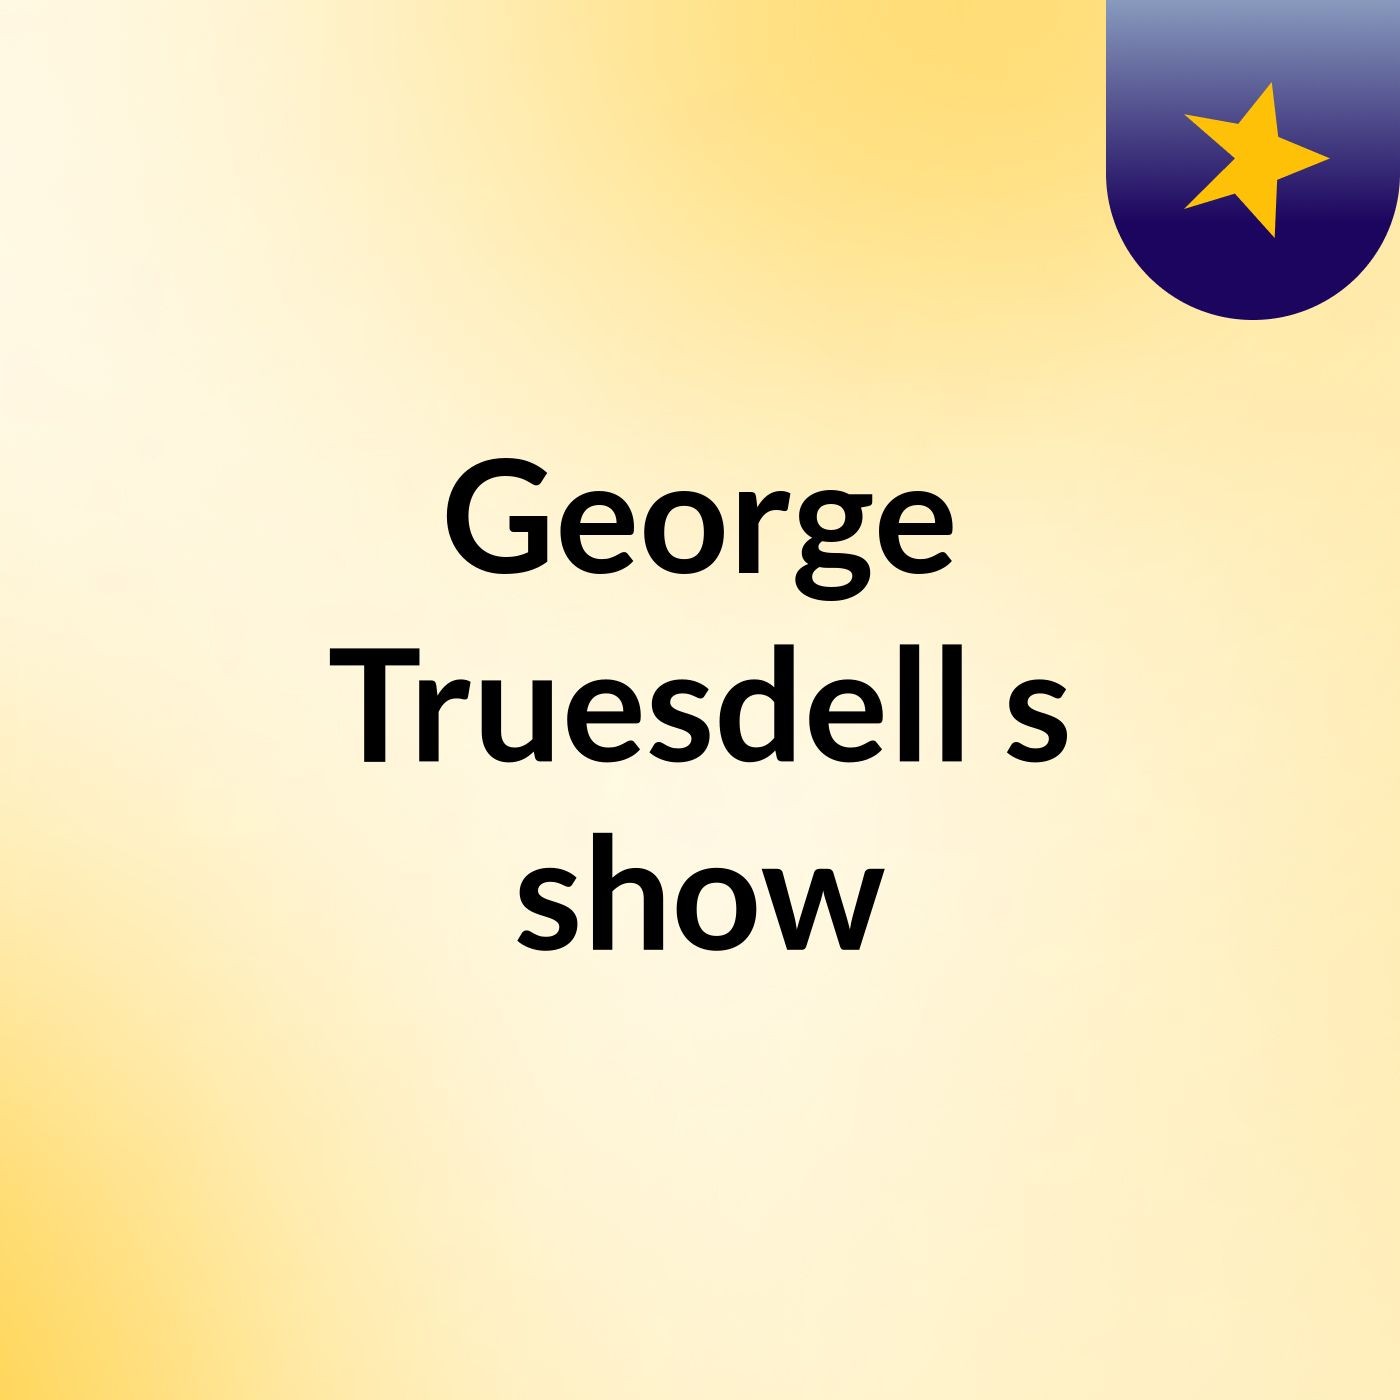 George Truesdell's show